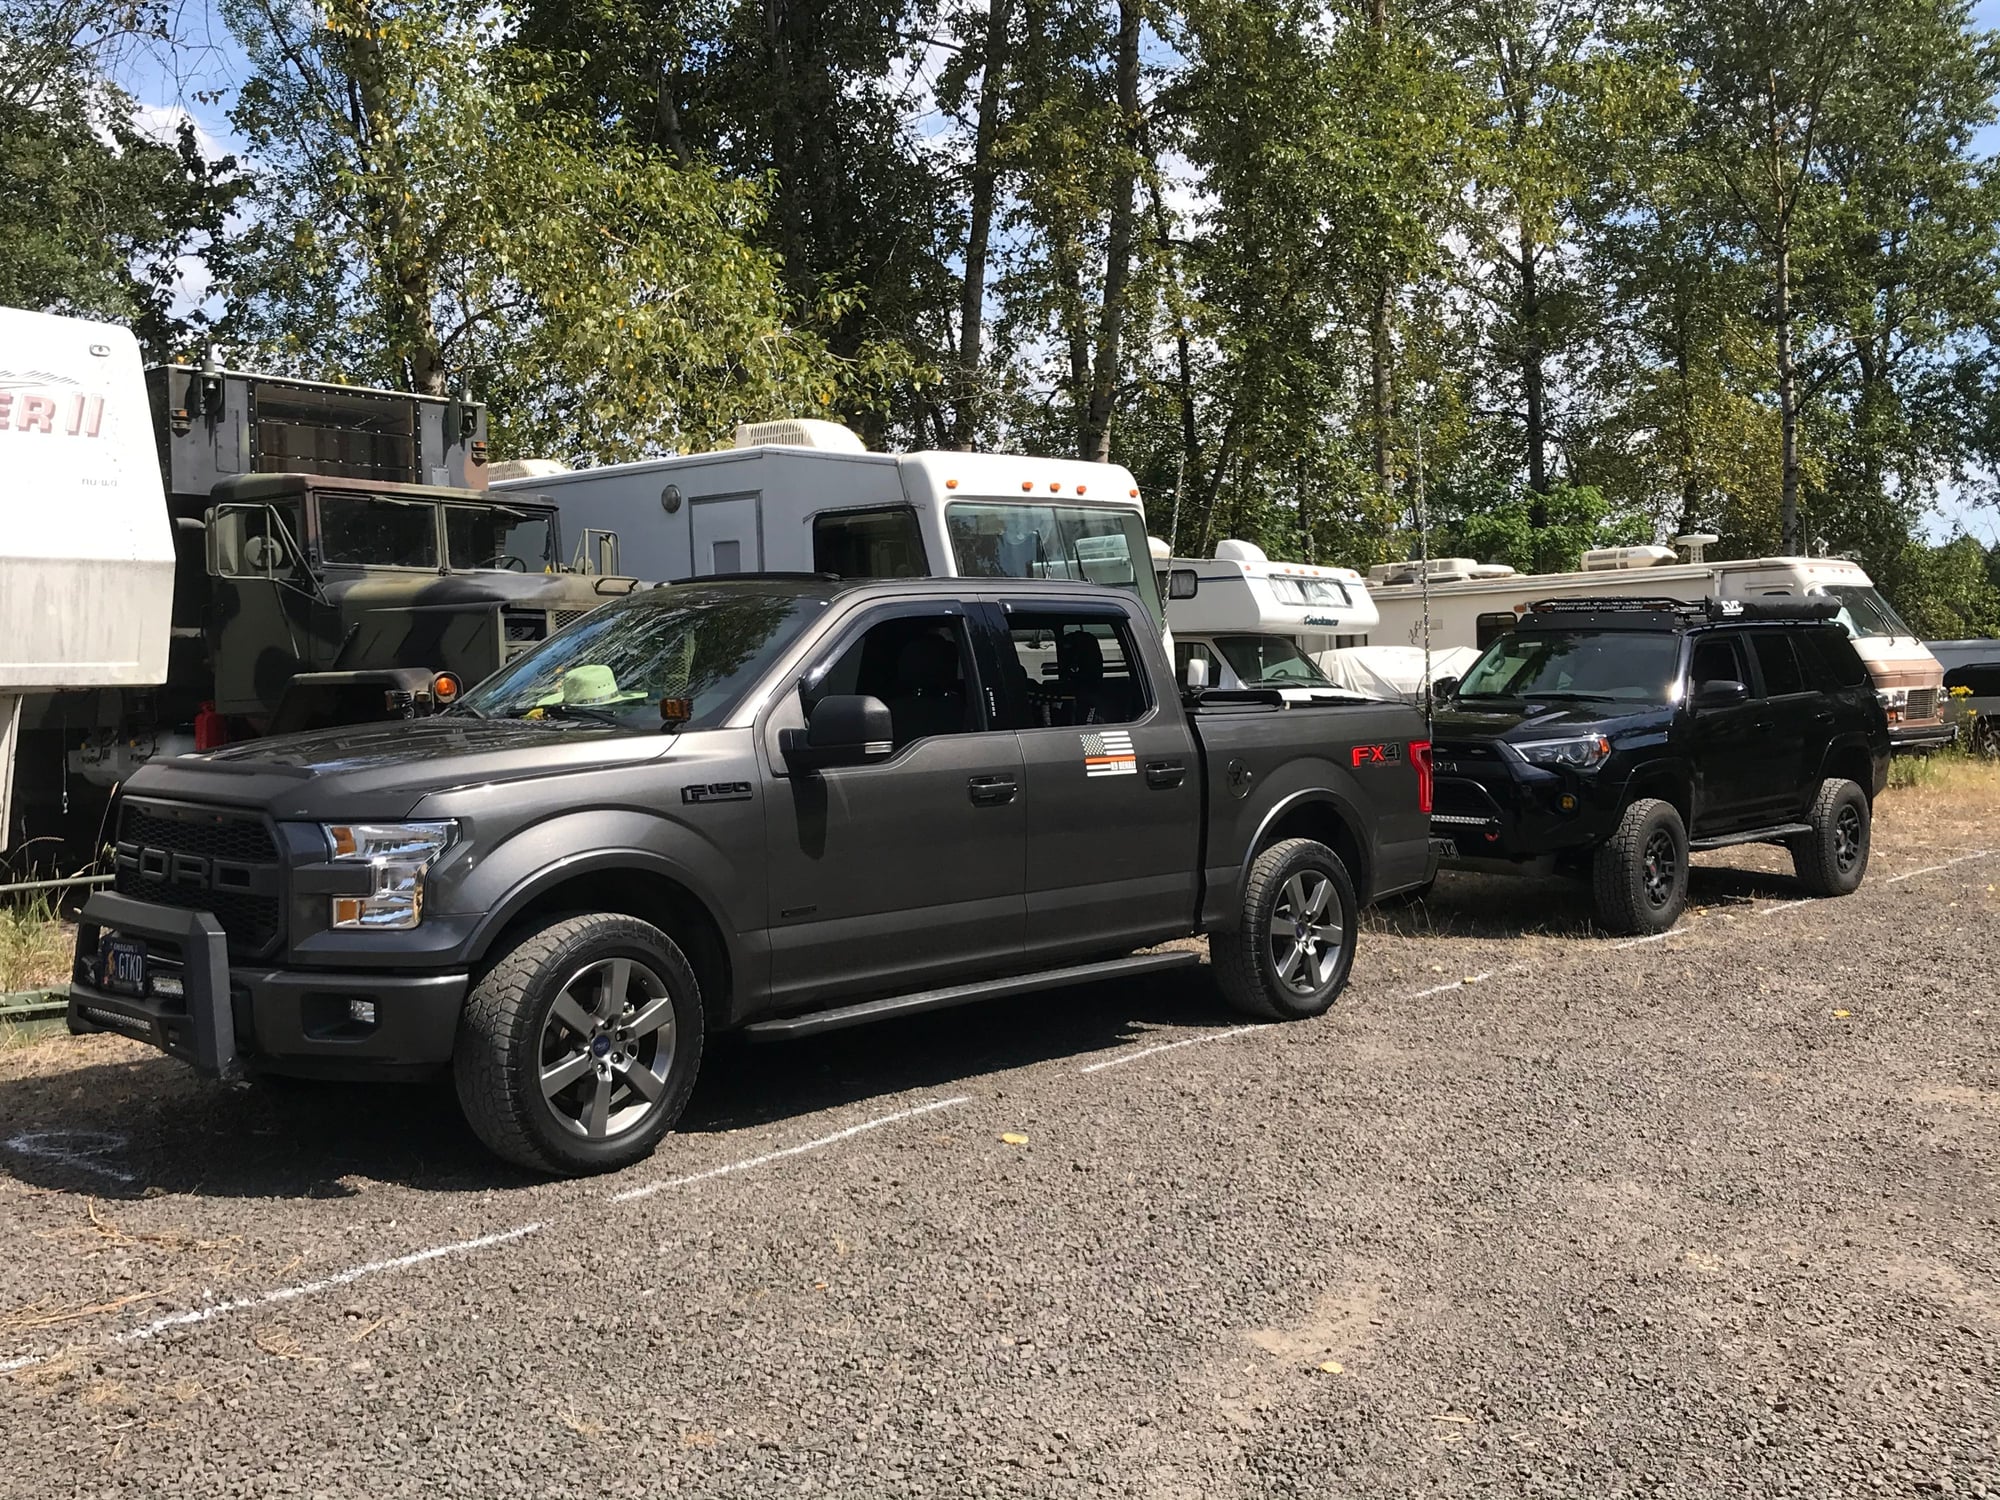 2016 F150 4x4 SuperCrew XLT 2.7 EcoBoost Build - Page 53 - Ford F150 2016 Ford F 150 2.7 Ecoboost Problems